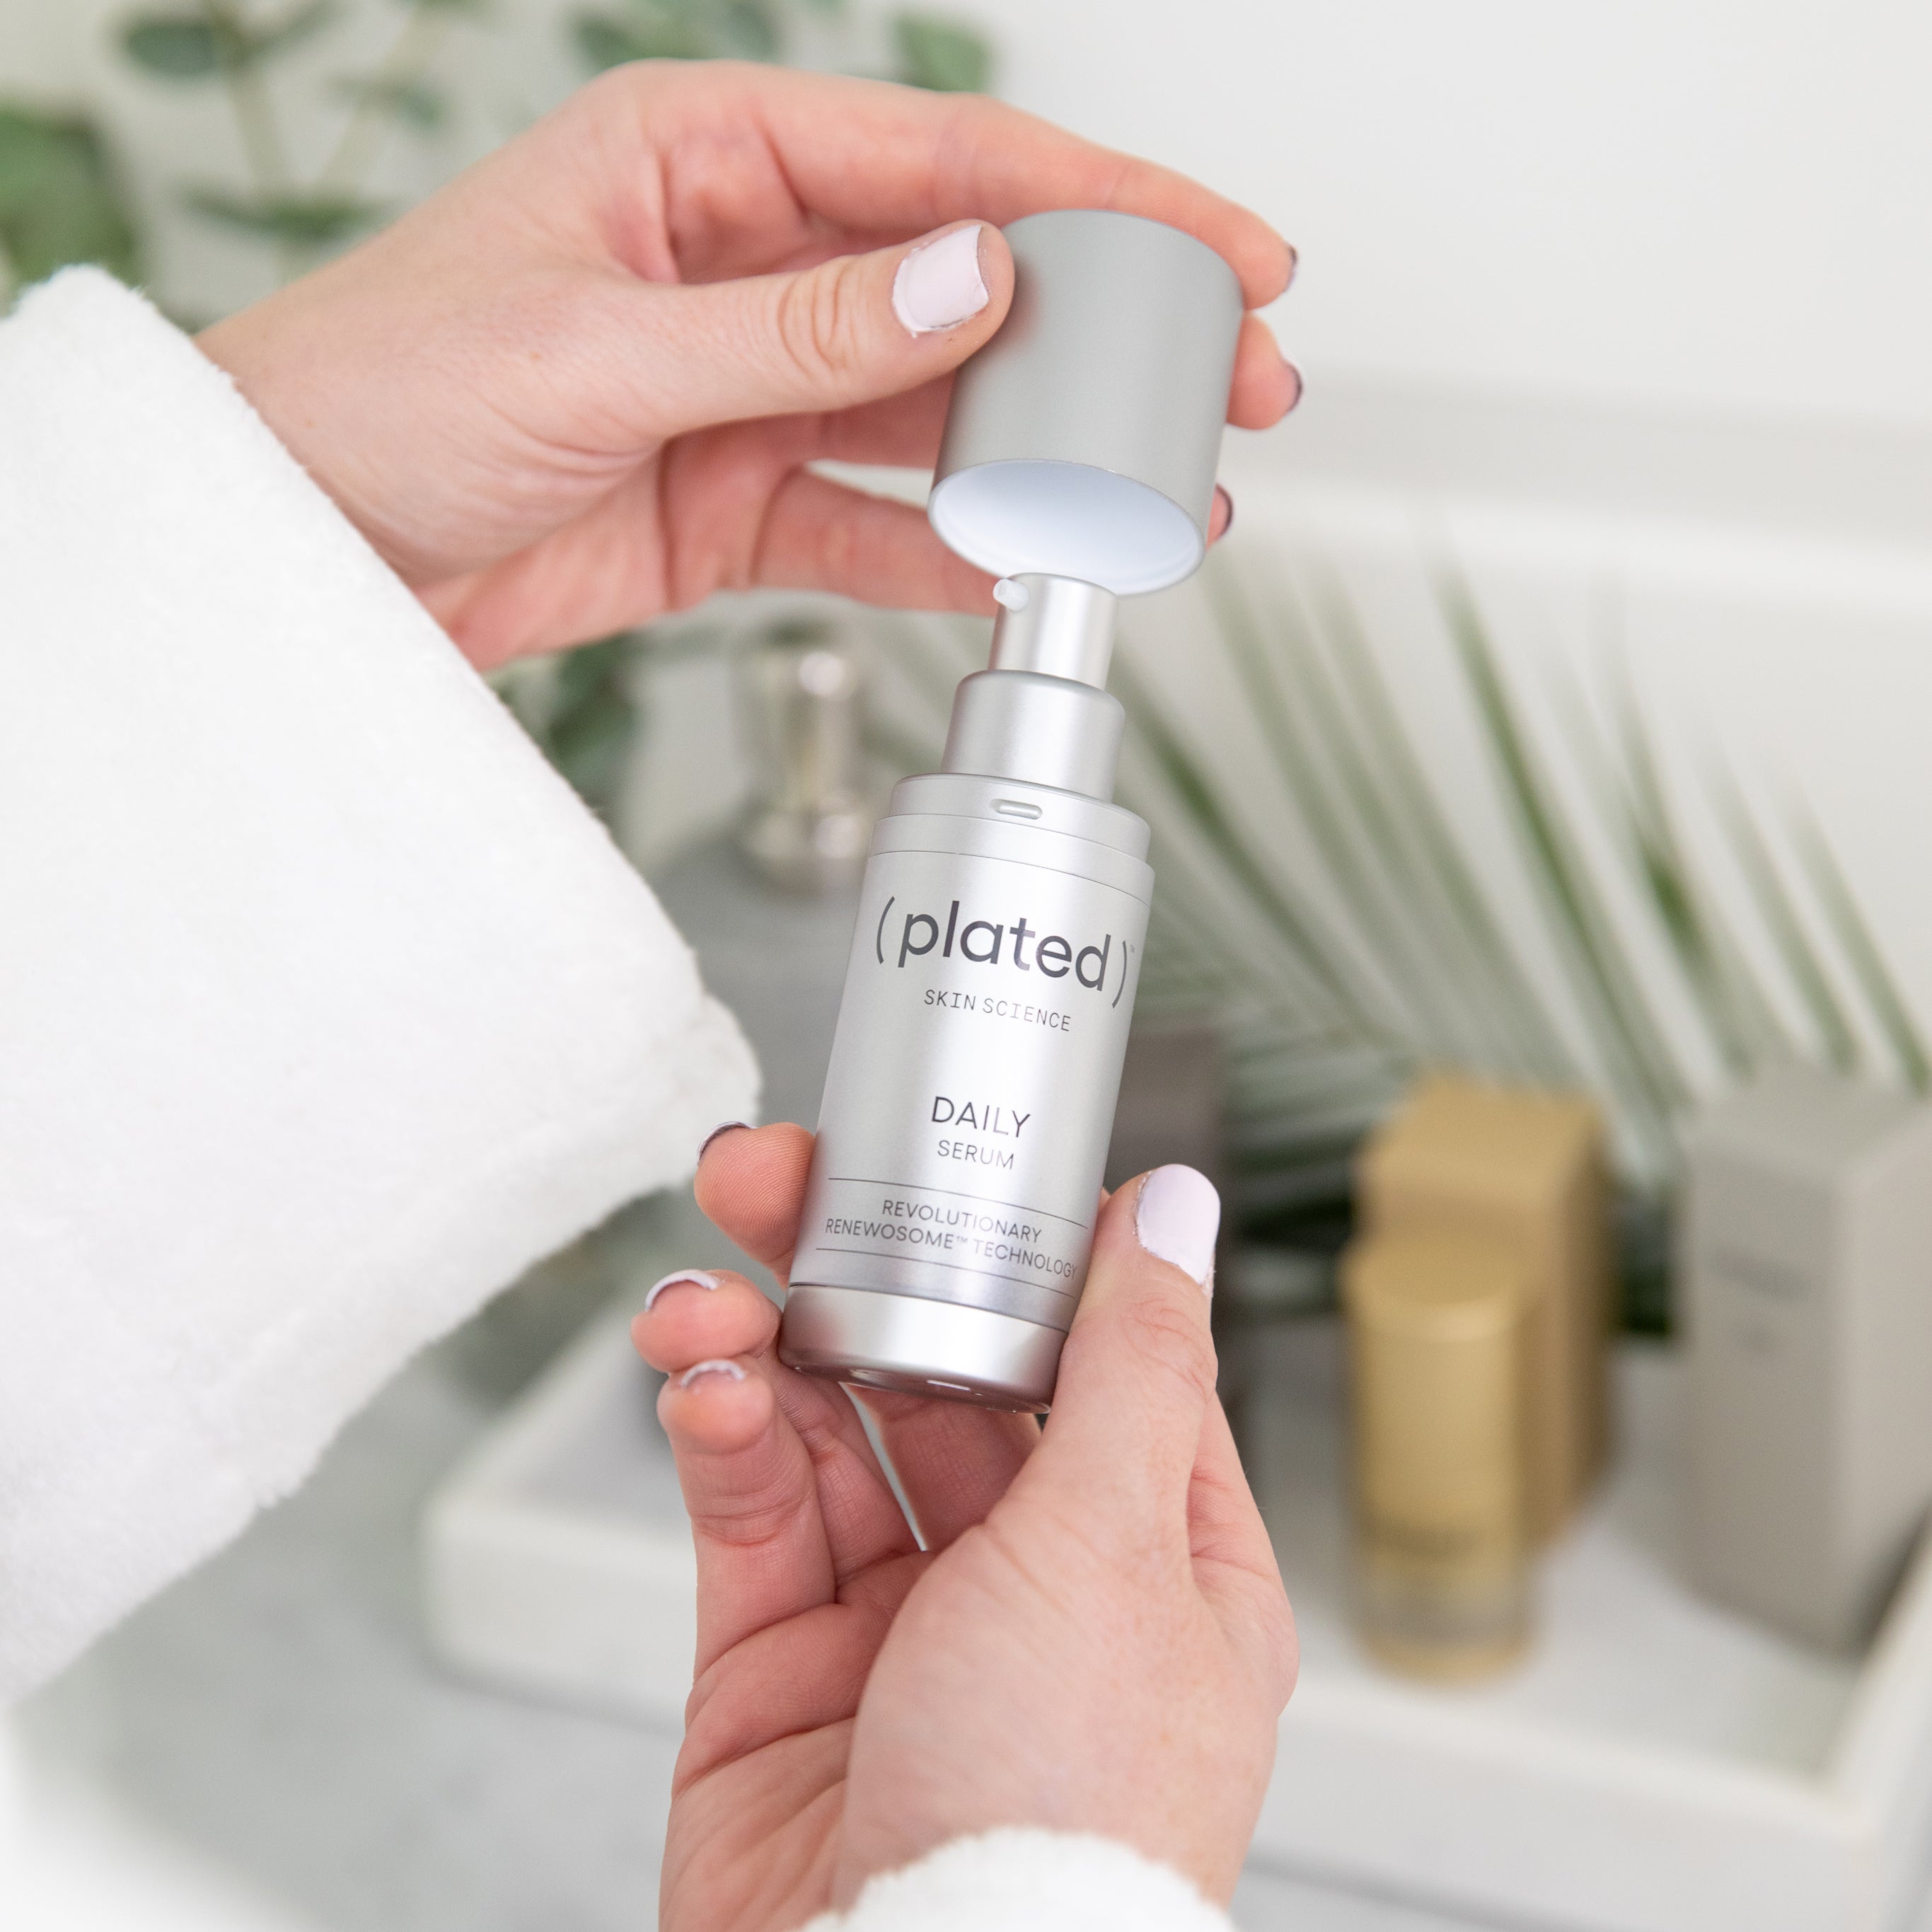 A bottle of Plated Skin Science Daily Serum in the hands of a person wearing a white bathrobe, with a bathroom counter in the background